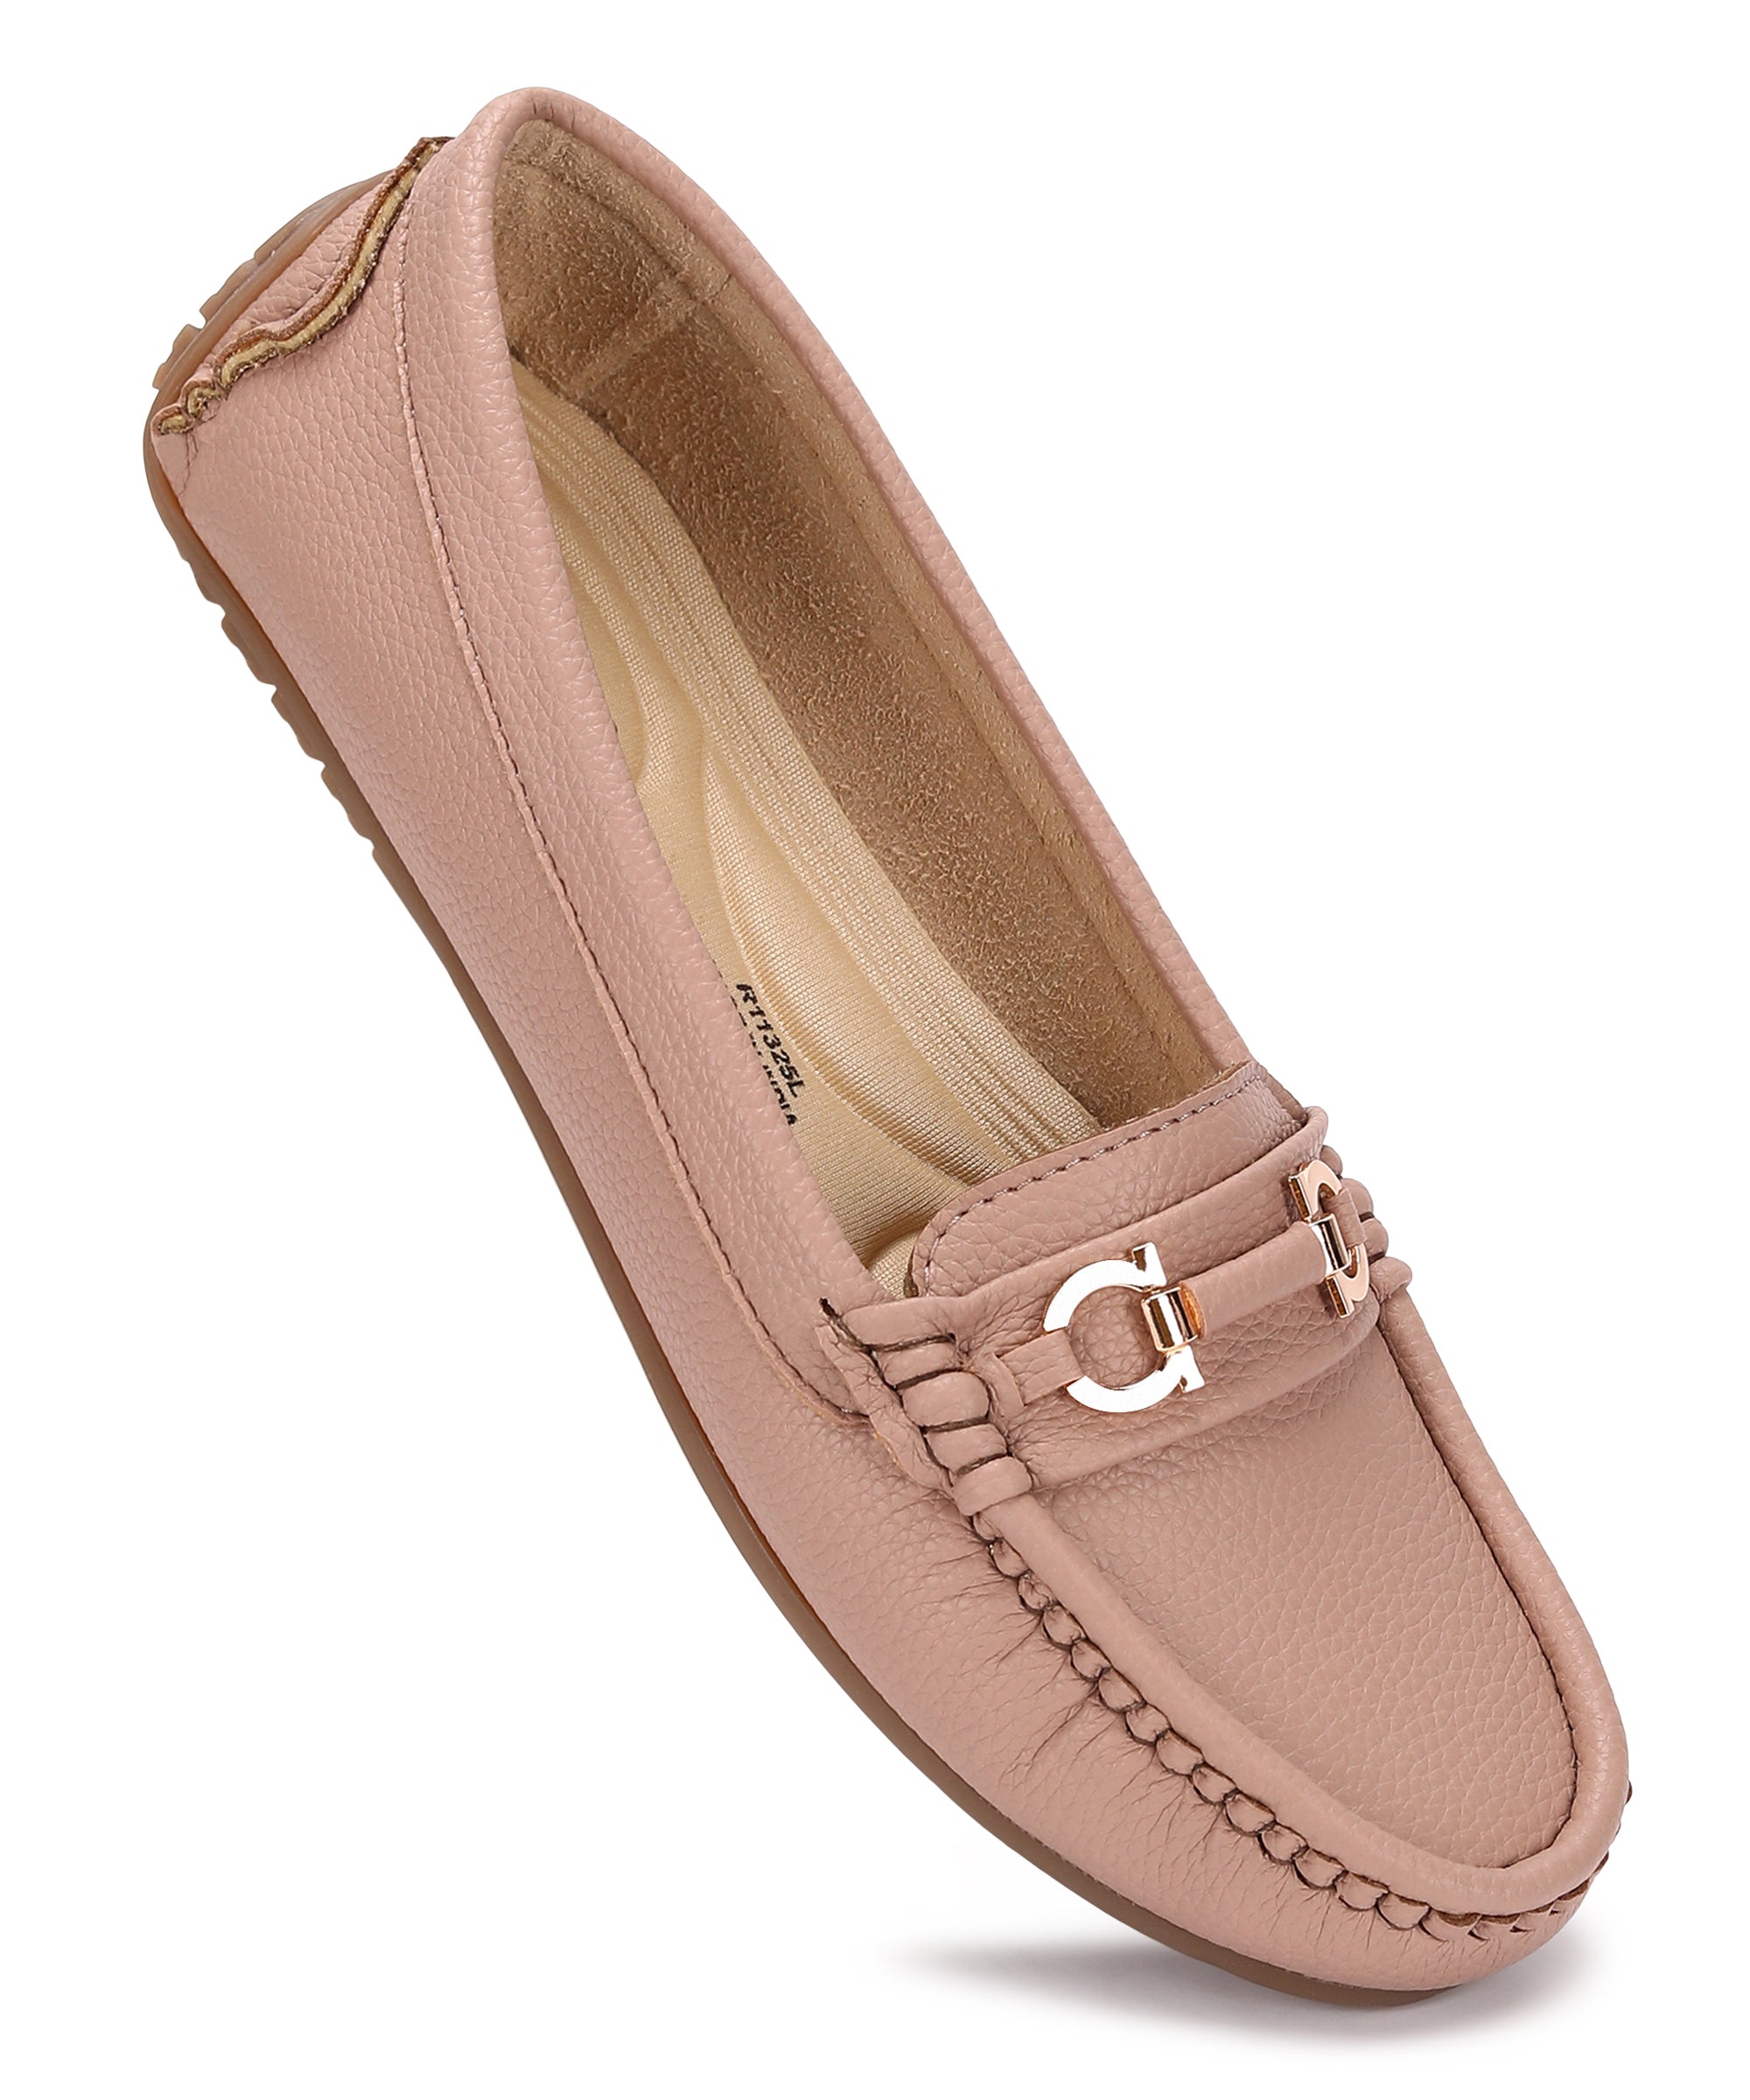 Paragon Women&#39;s Formal Loafer Shoes | Latest Design with Stylish Features, Comfortable Cushioned Sole and Sturdy Construction